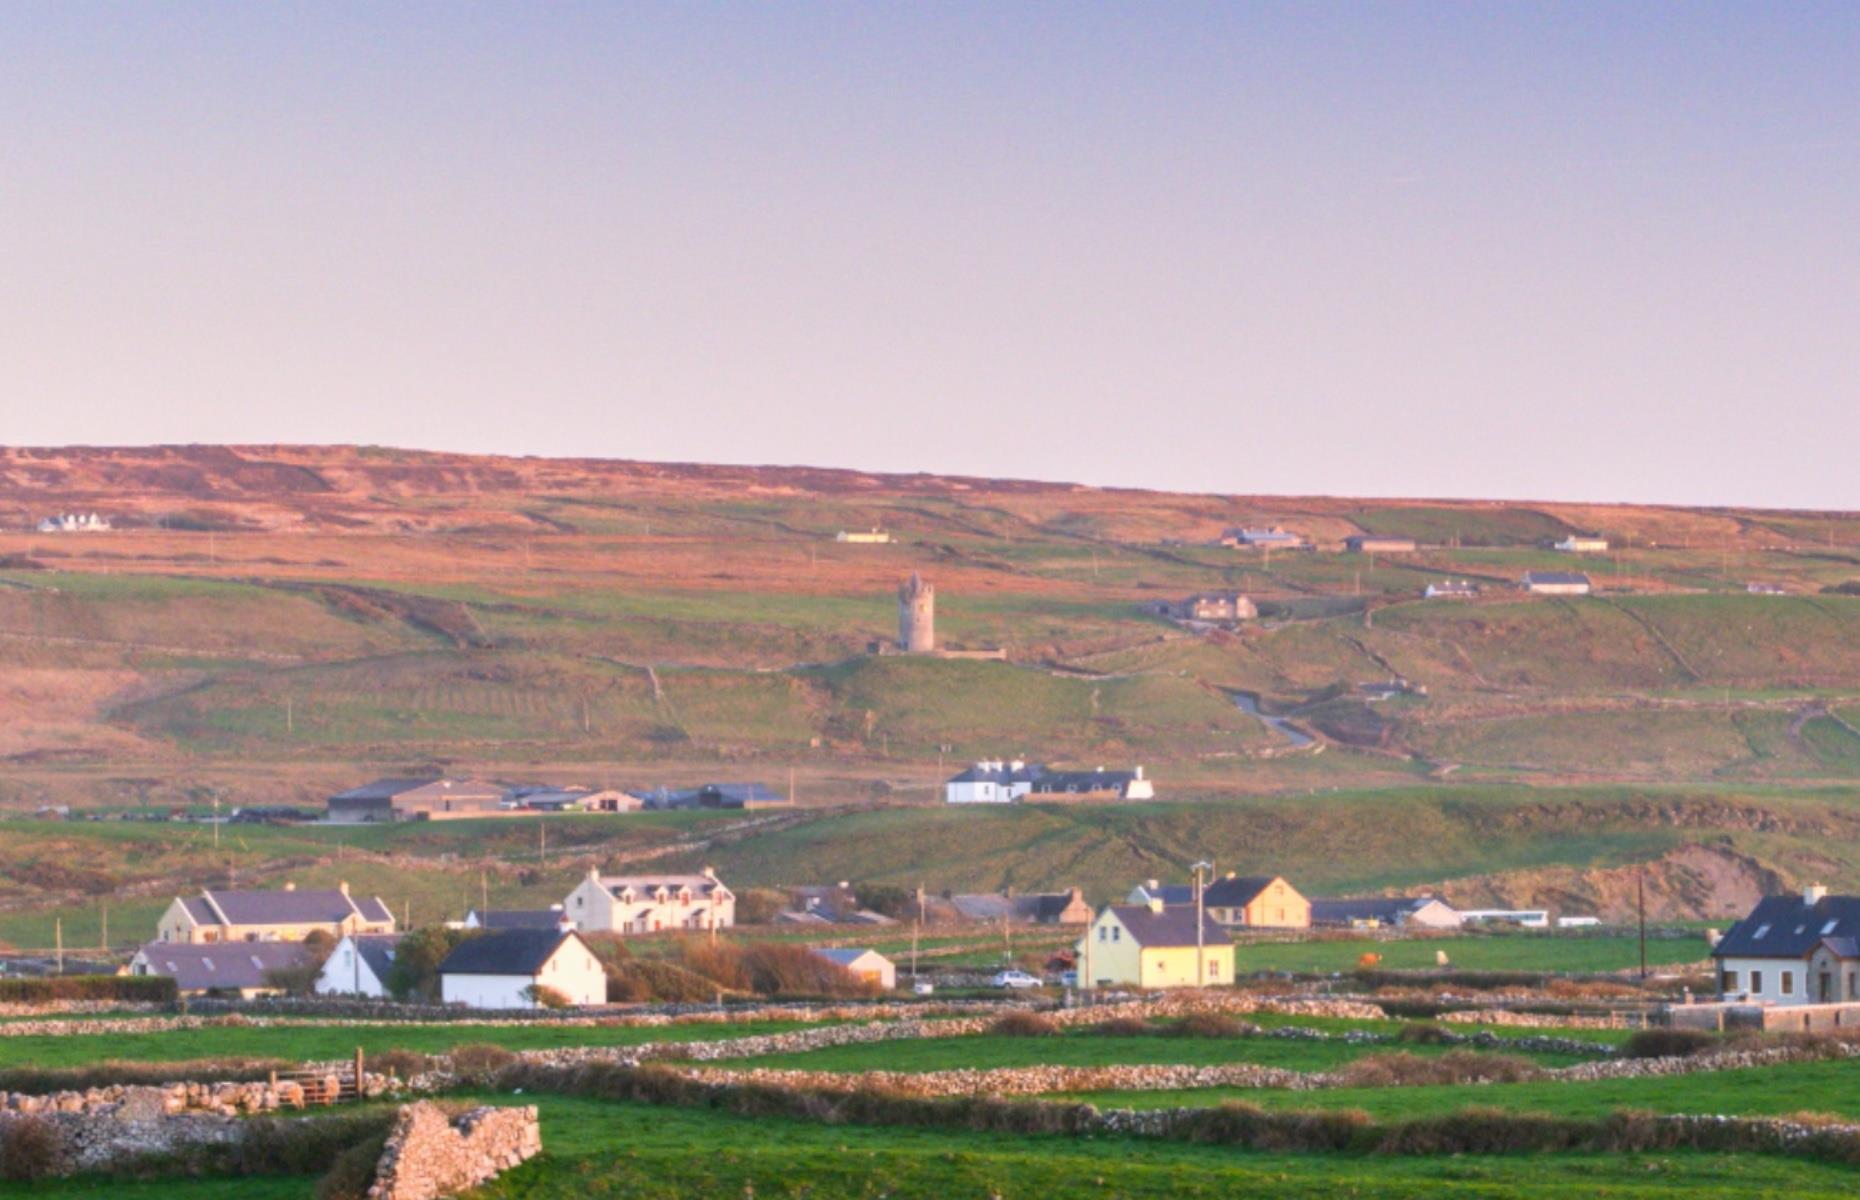 <p>Part of a cluster of settlements, tiny Doolin is a must for fans of traditional Irish music, with a handful of cozy pubs. Head out to the wildflower-covered Cliffs of Moher and see the longest stalactite in Europe at Doolin Cave. It’s also the gateway to the Irish-speaking Aran Islands, just offshore. Rich with traditional Irish culture and heritage and surrounded by pretty cottages, day trippers find it hard to leave the remote beauty of these islands. </p>